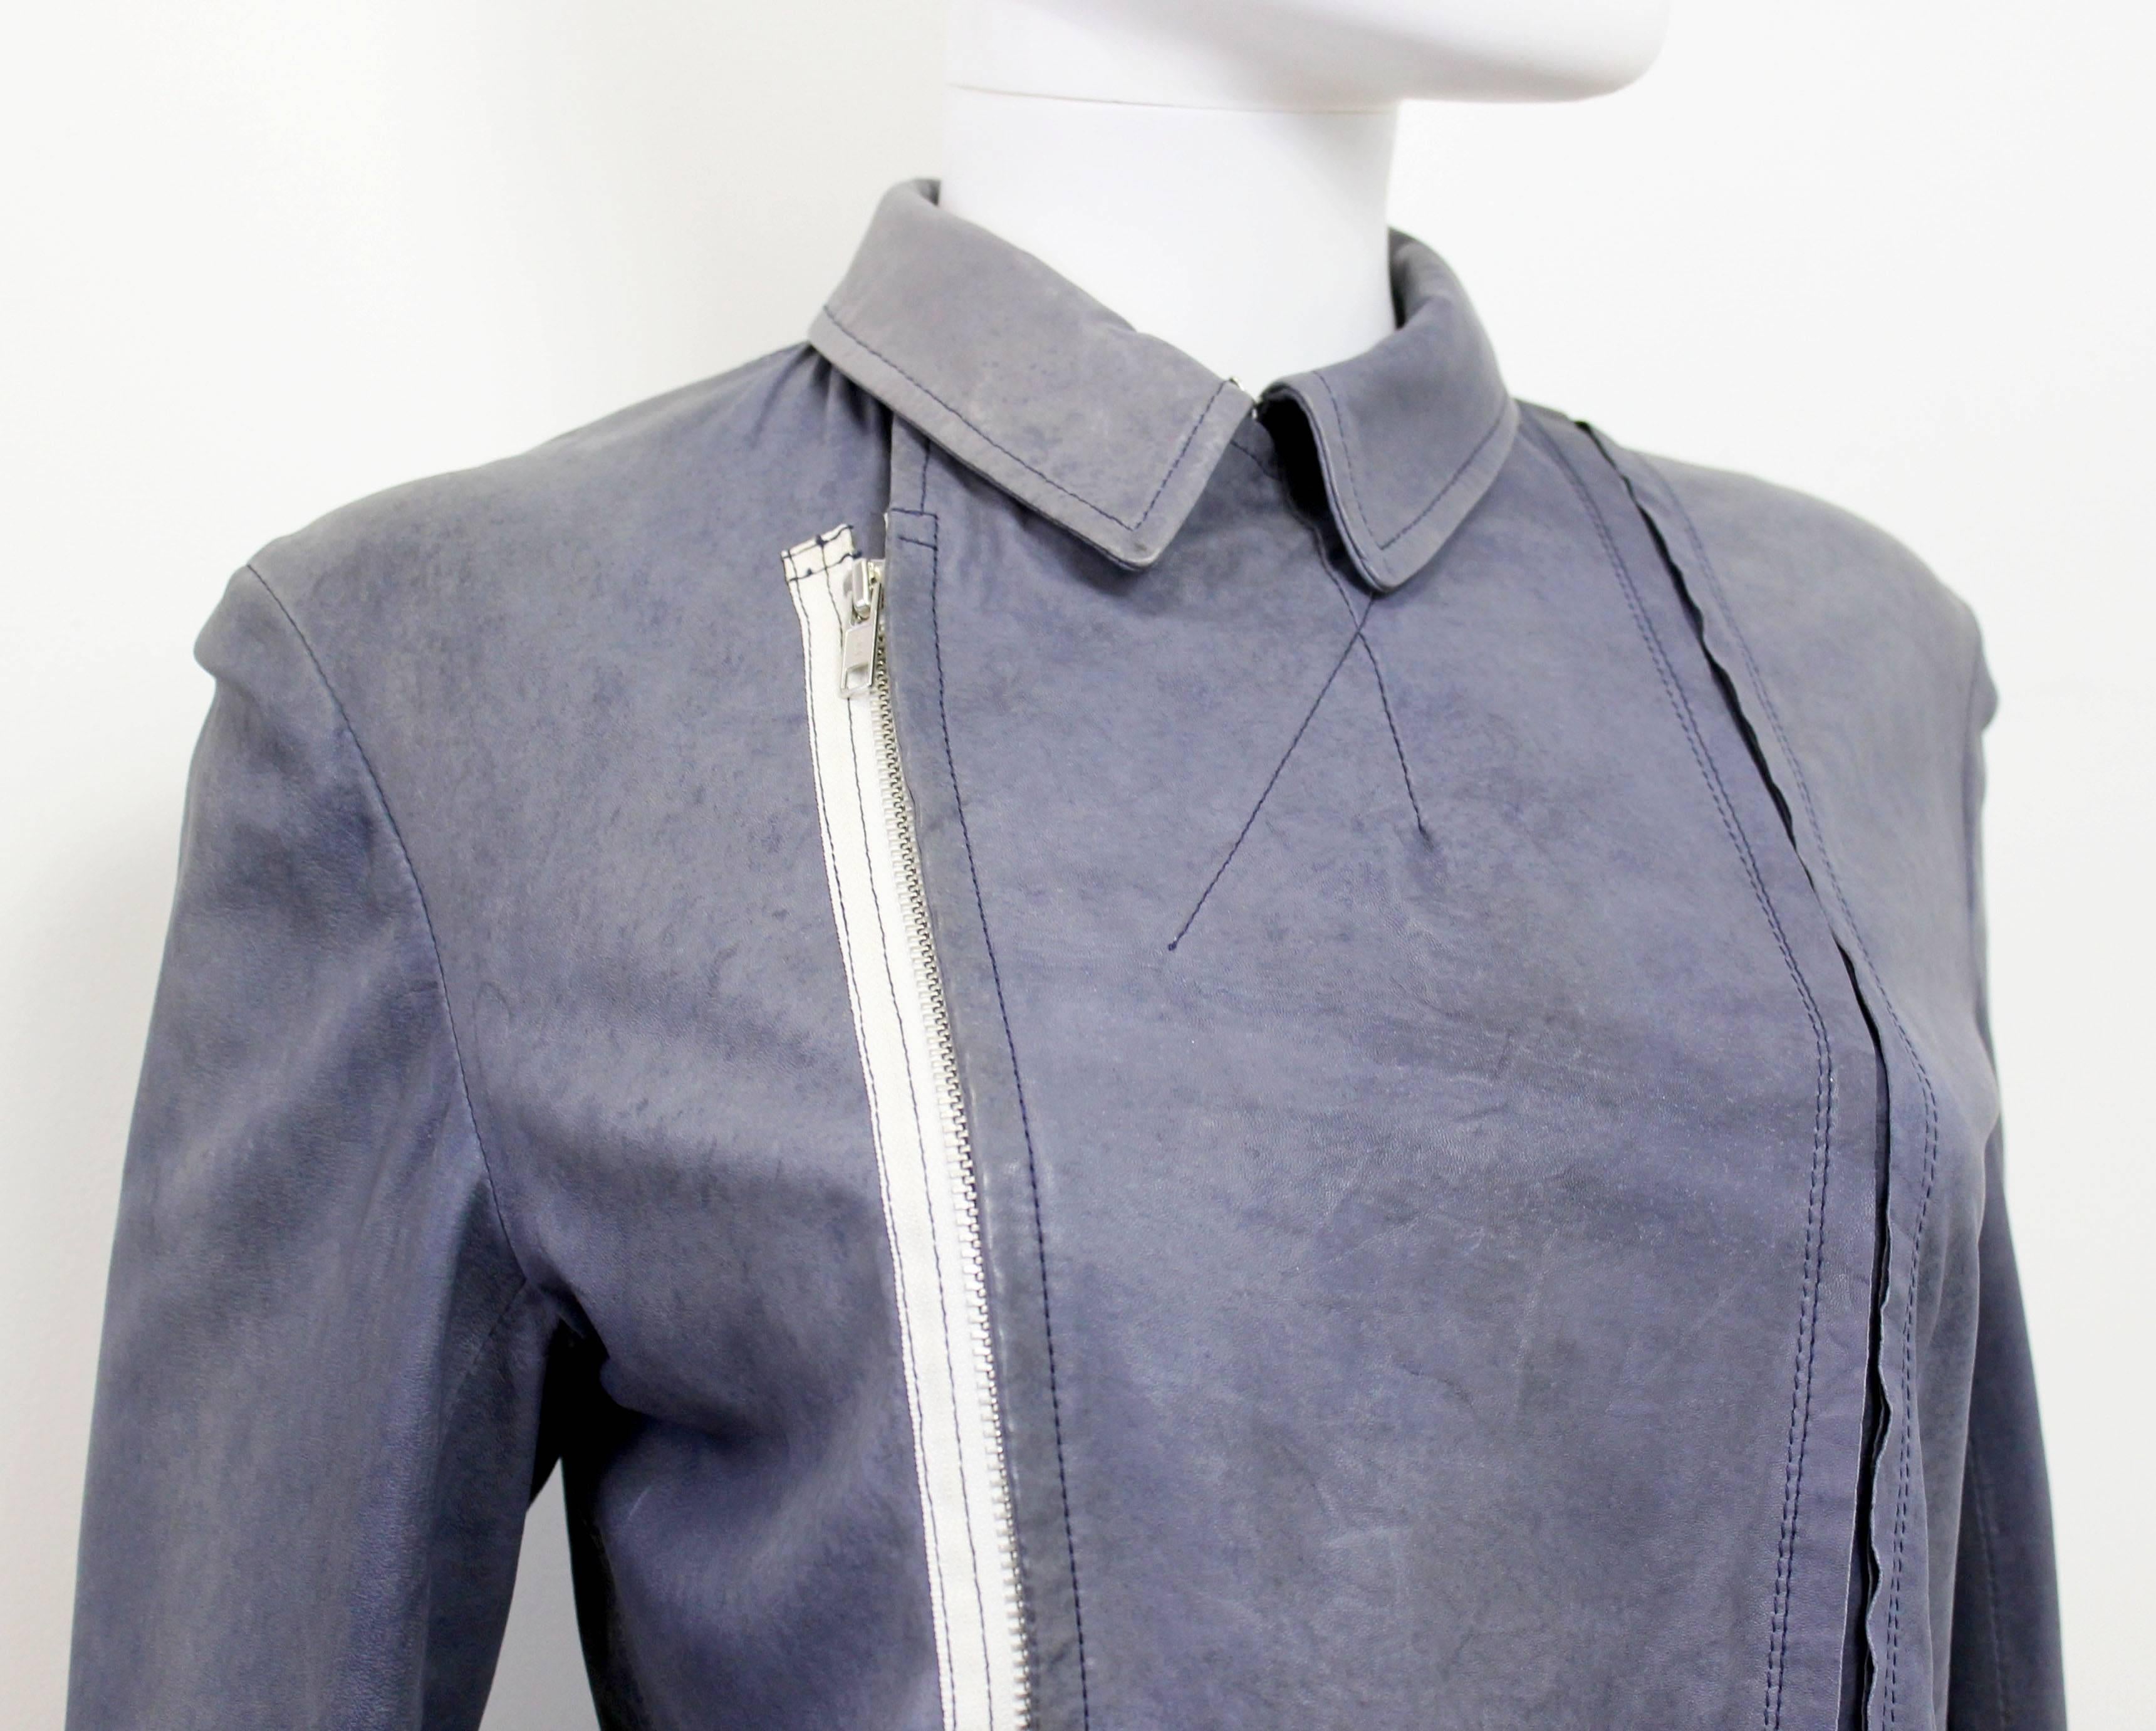 A beautiful goat skin jacket by Comme des Garcons. The jacket features exposed edge details and a white zipper.